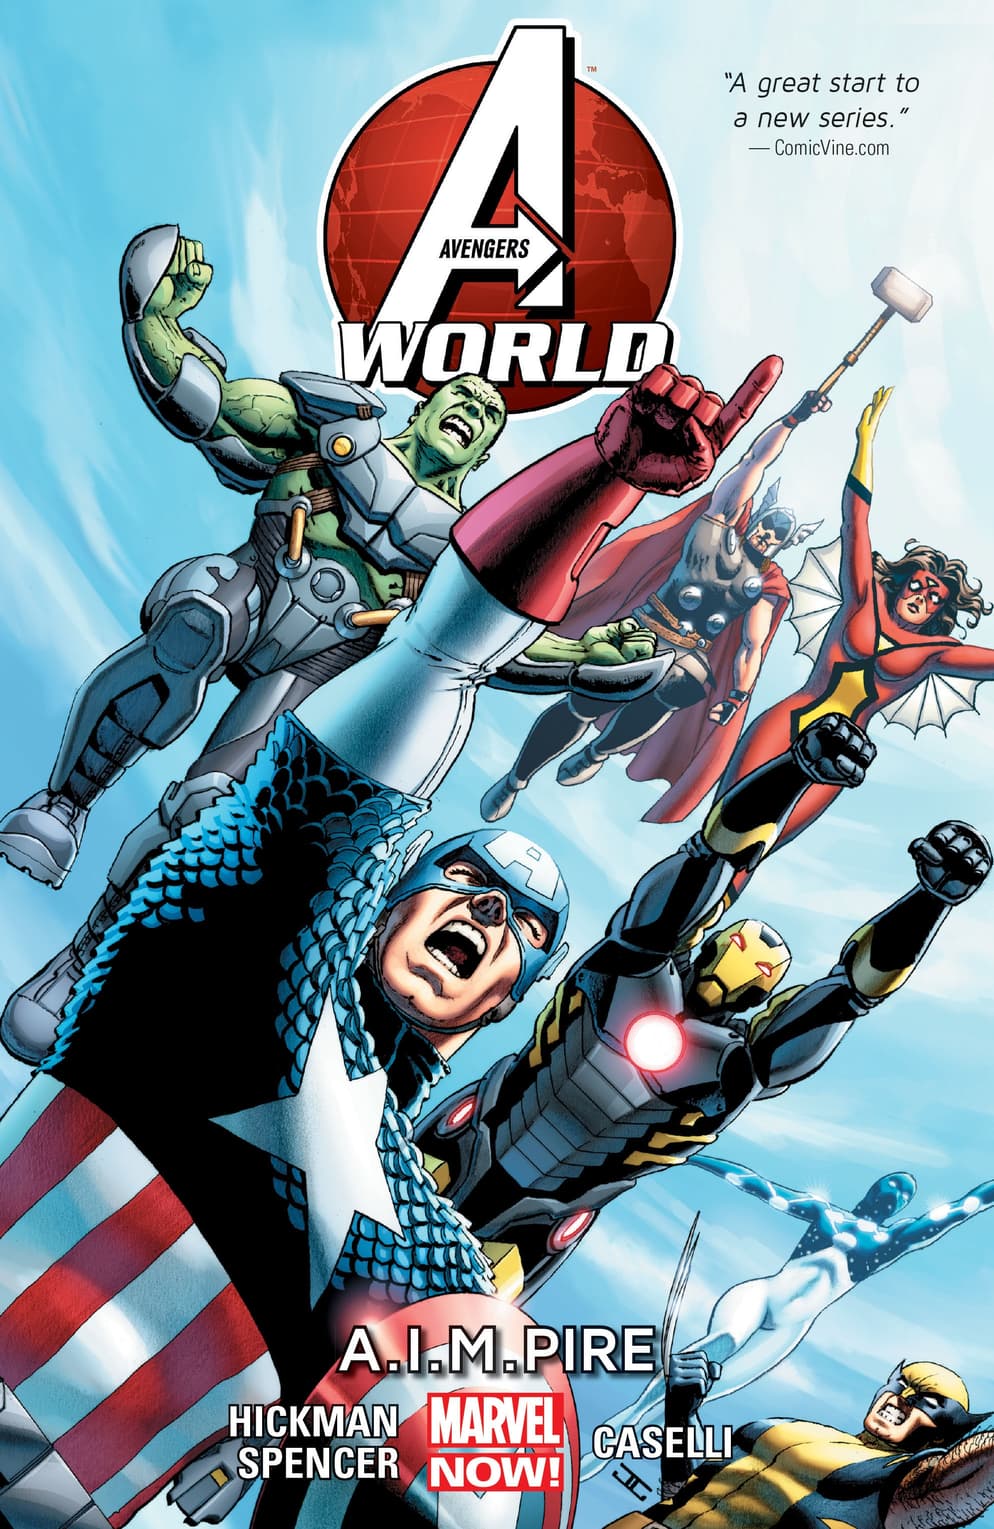 Cover to AVENGERS WORLD VOL. 1: A.I.M.PIRE.